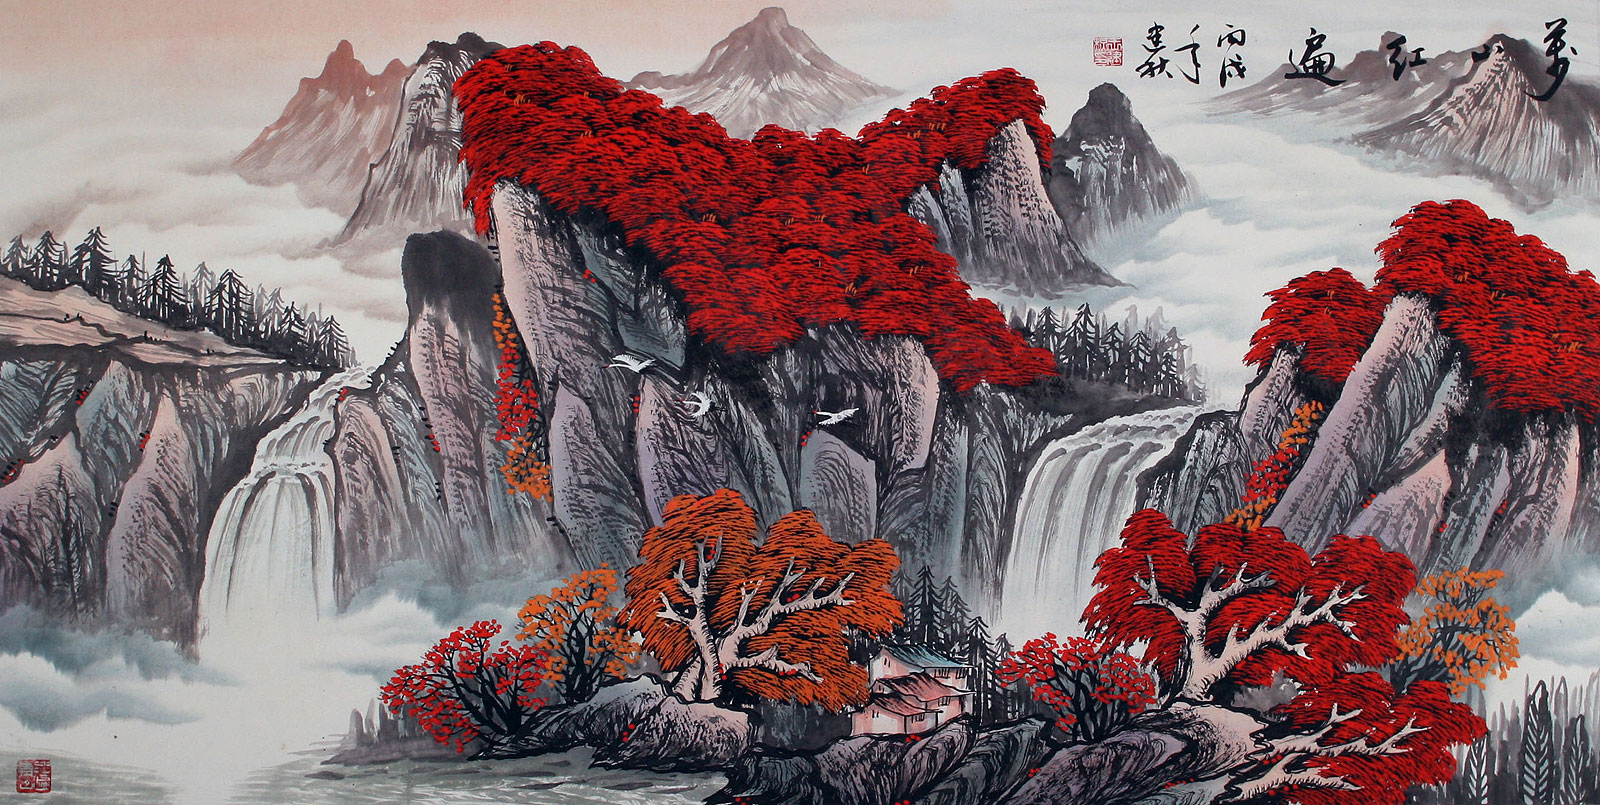  Red  Leaves of Autumn Asian Art  Landscape Chinese Artwork 